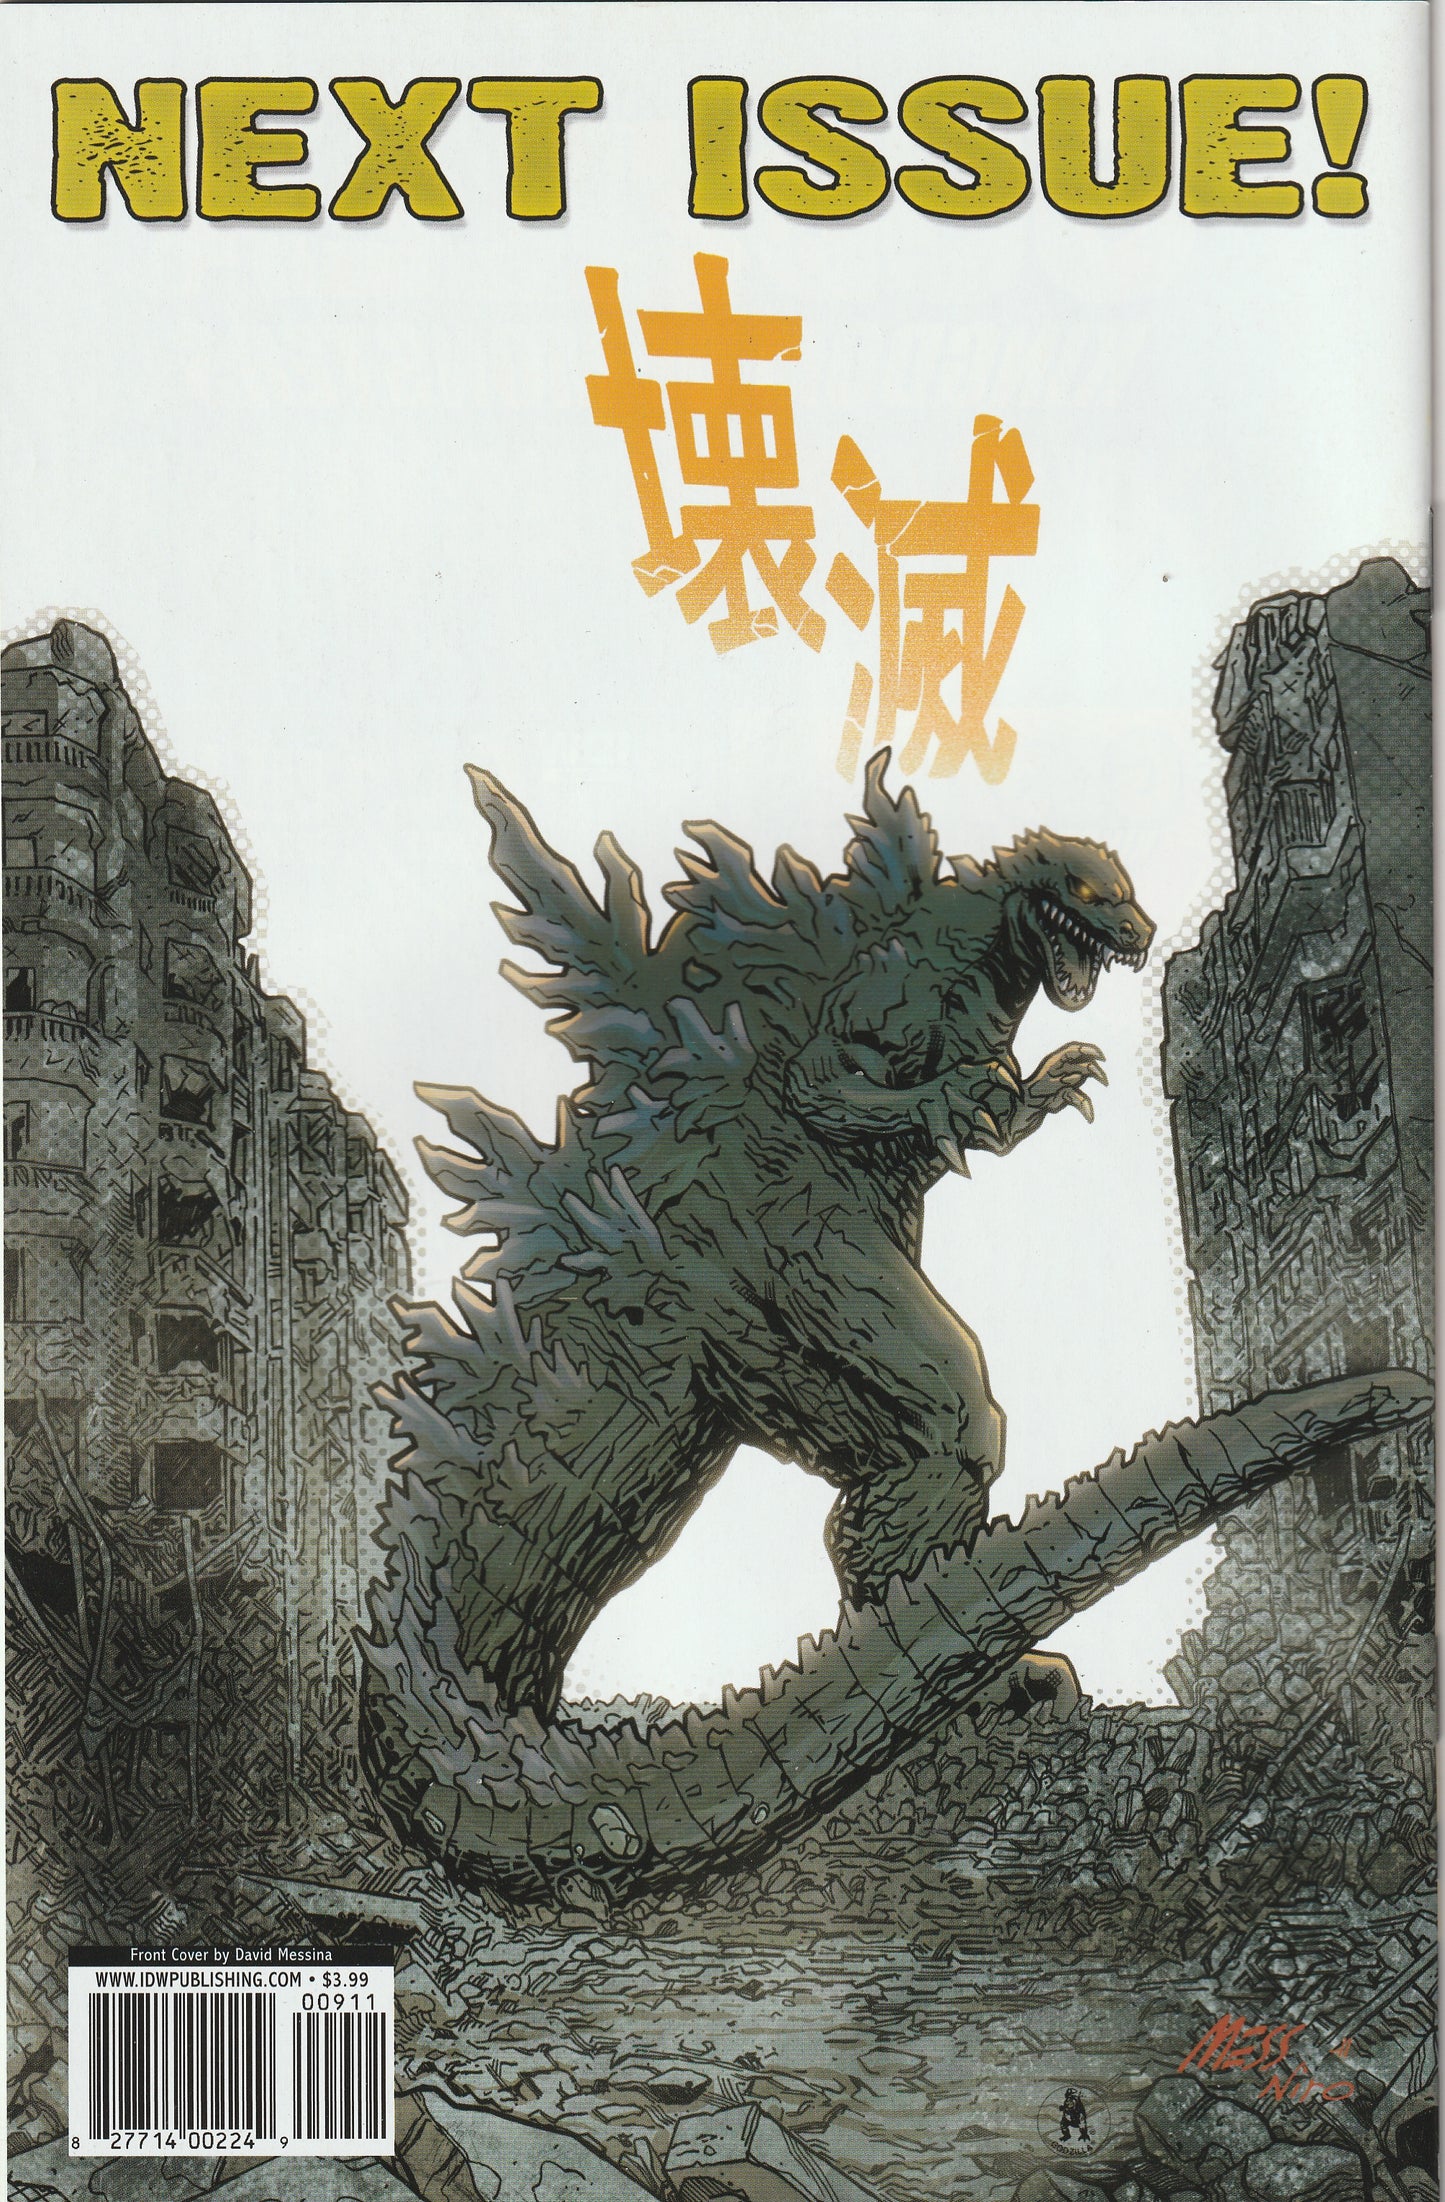 Godzilla Kingdom of Monsters #9 (2011) - Cover A by David Messina